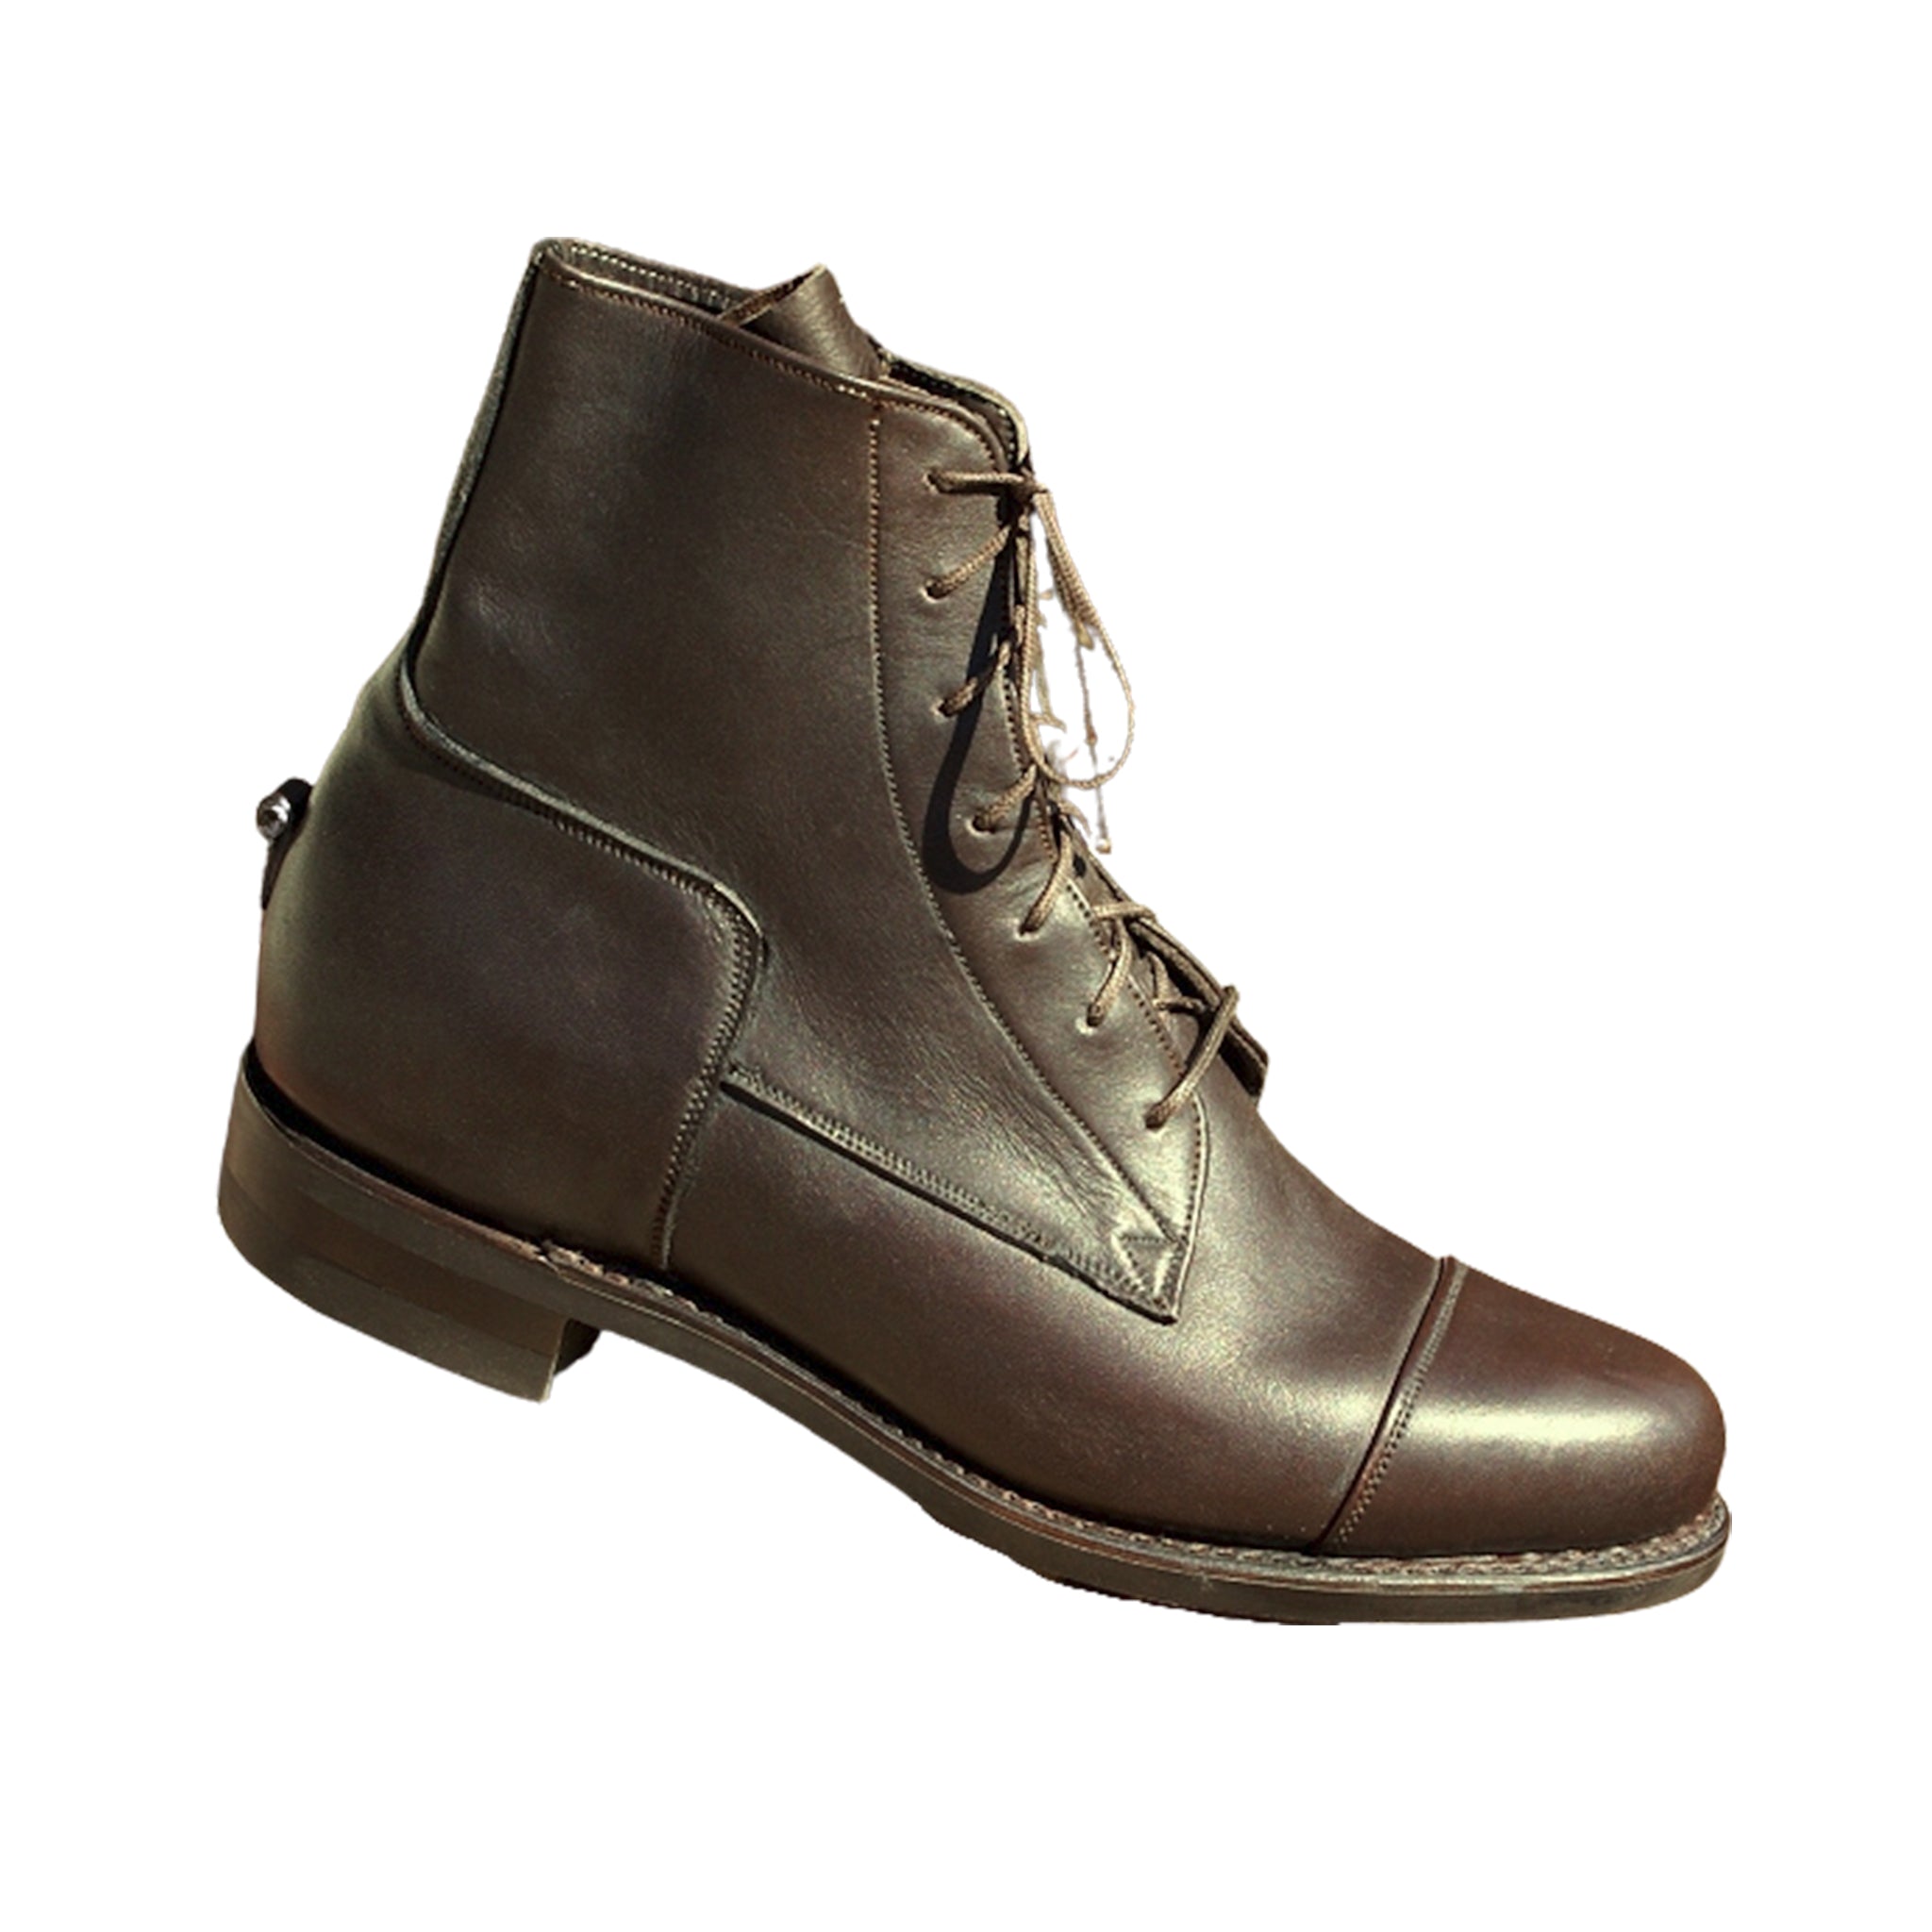 Dehner Co. Laced Women's Paddock Boot